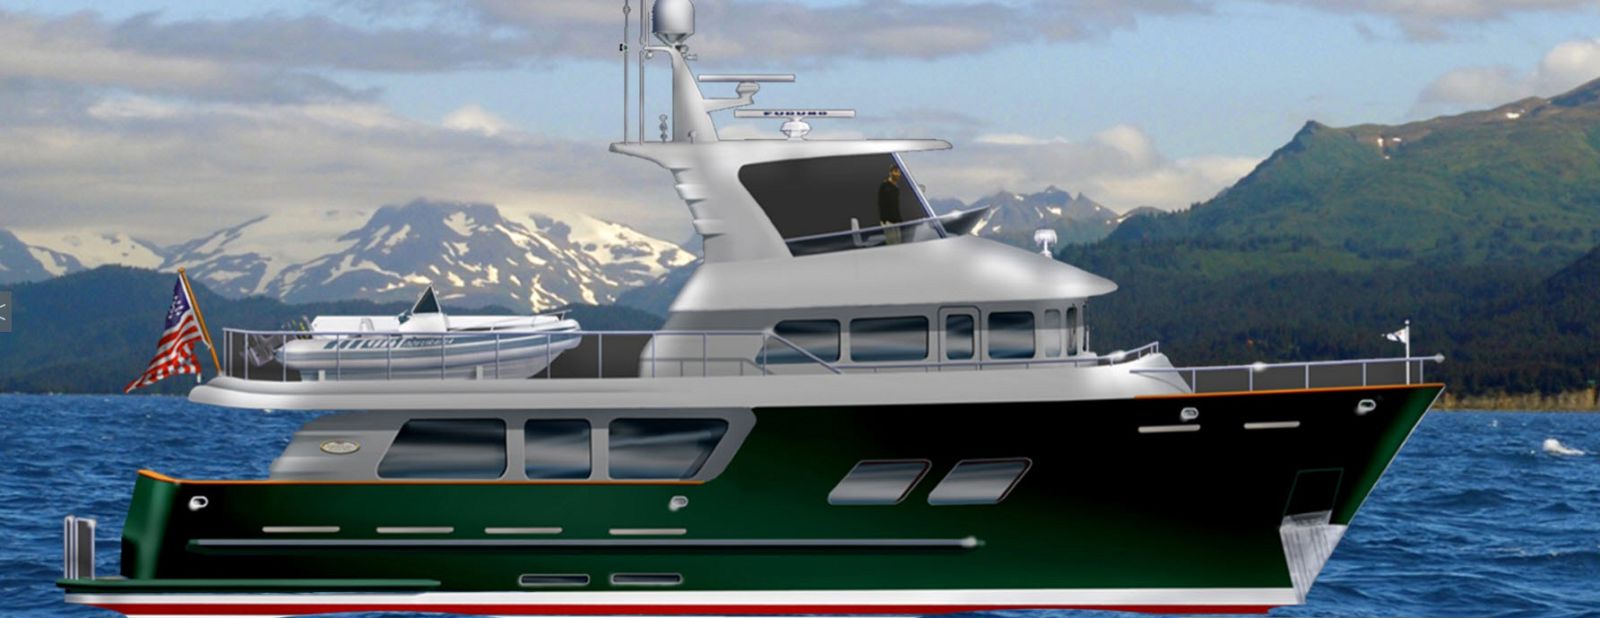 northern marine 70 expedition yacht rendering